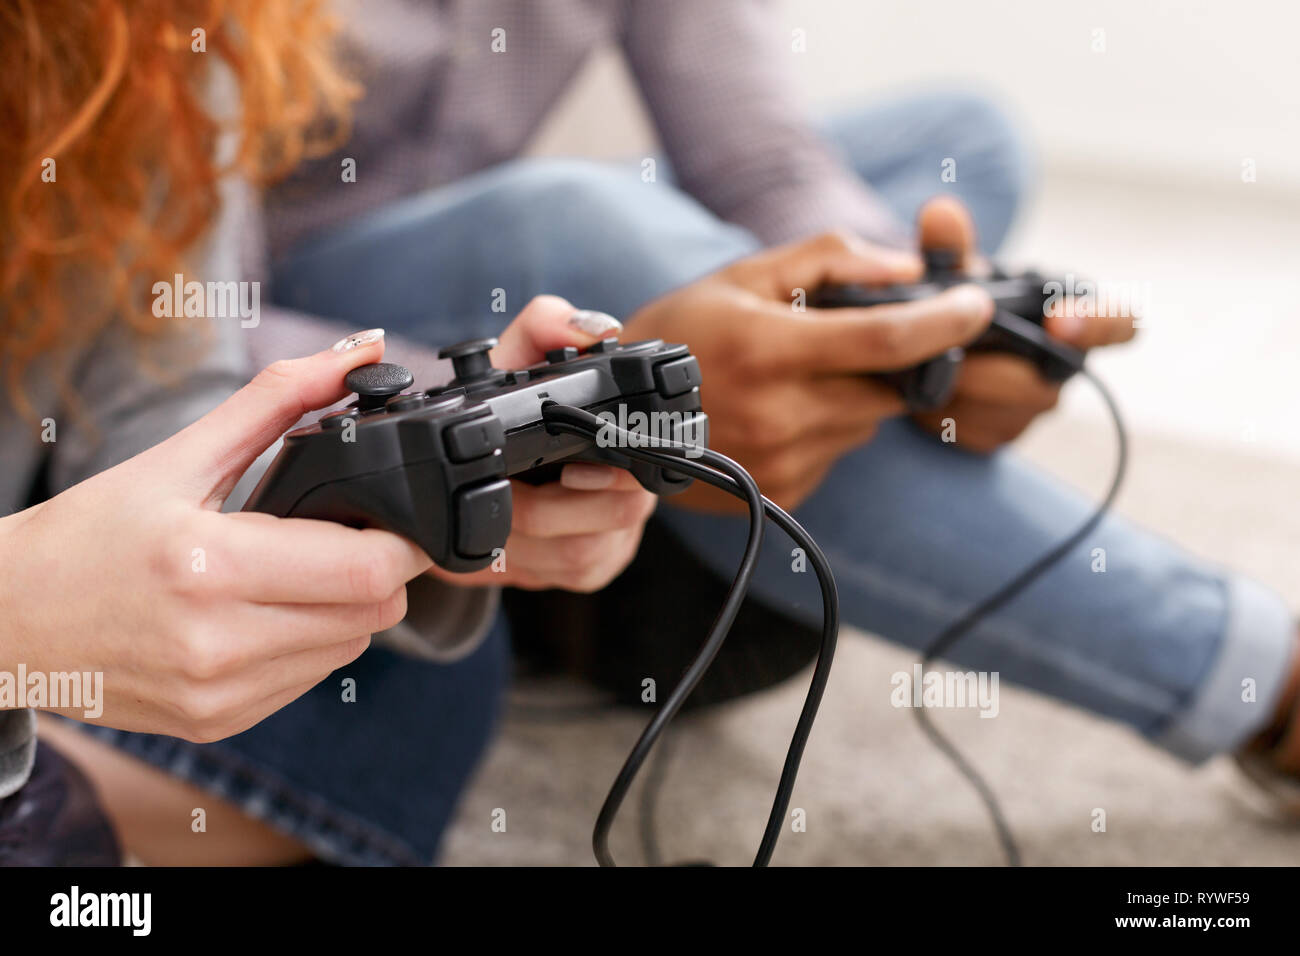 Friends playing video games, having fun at home Stock Photo